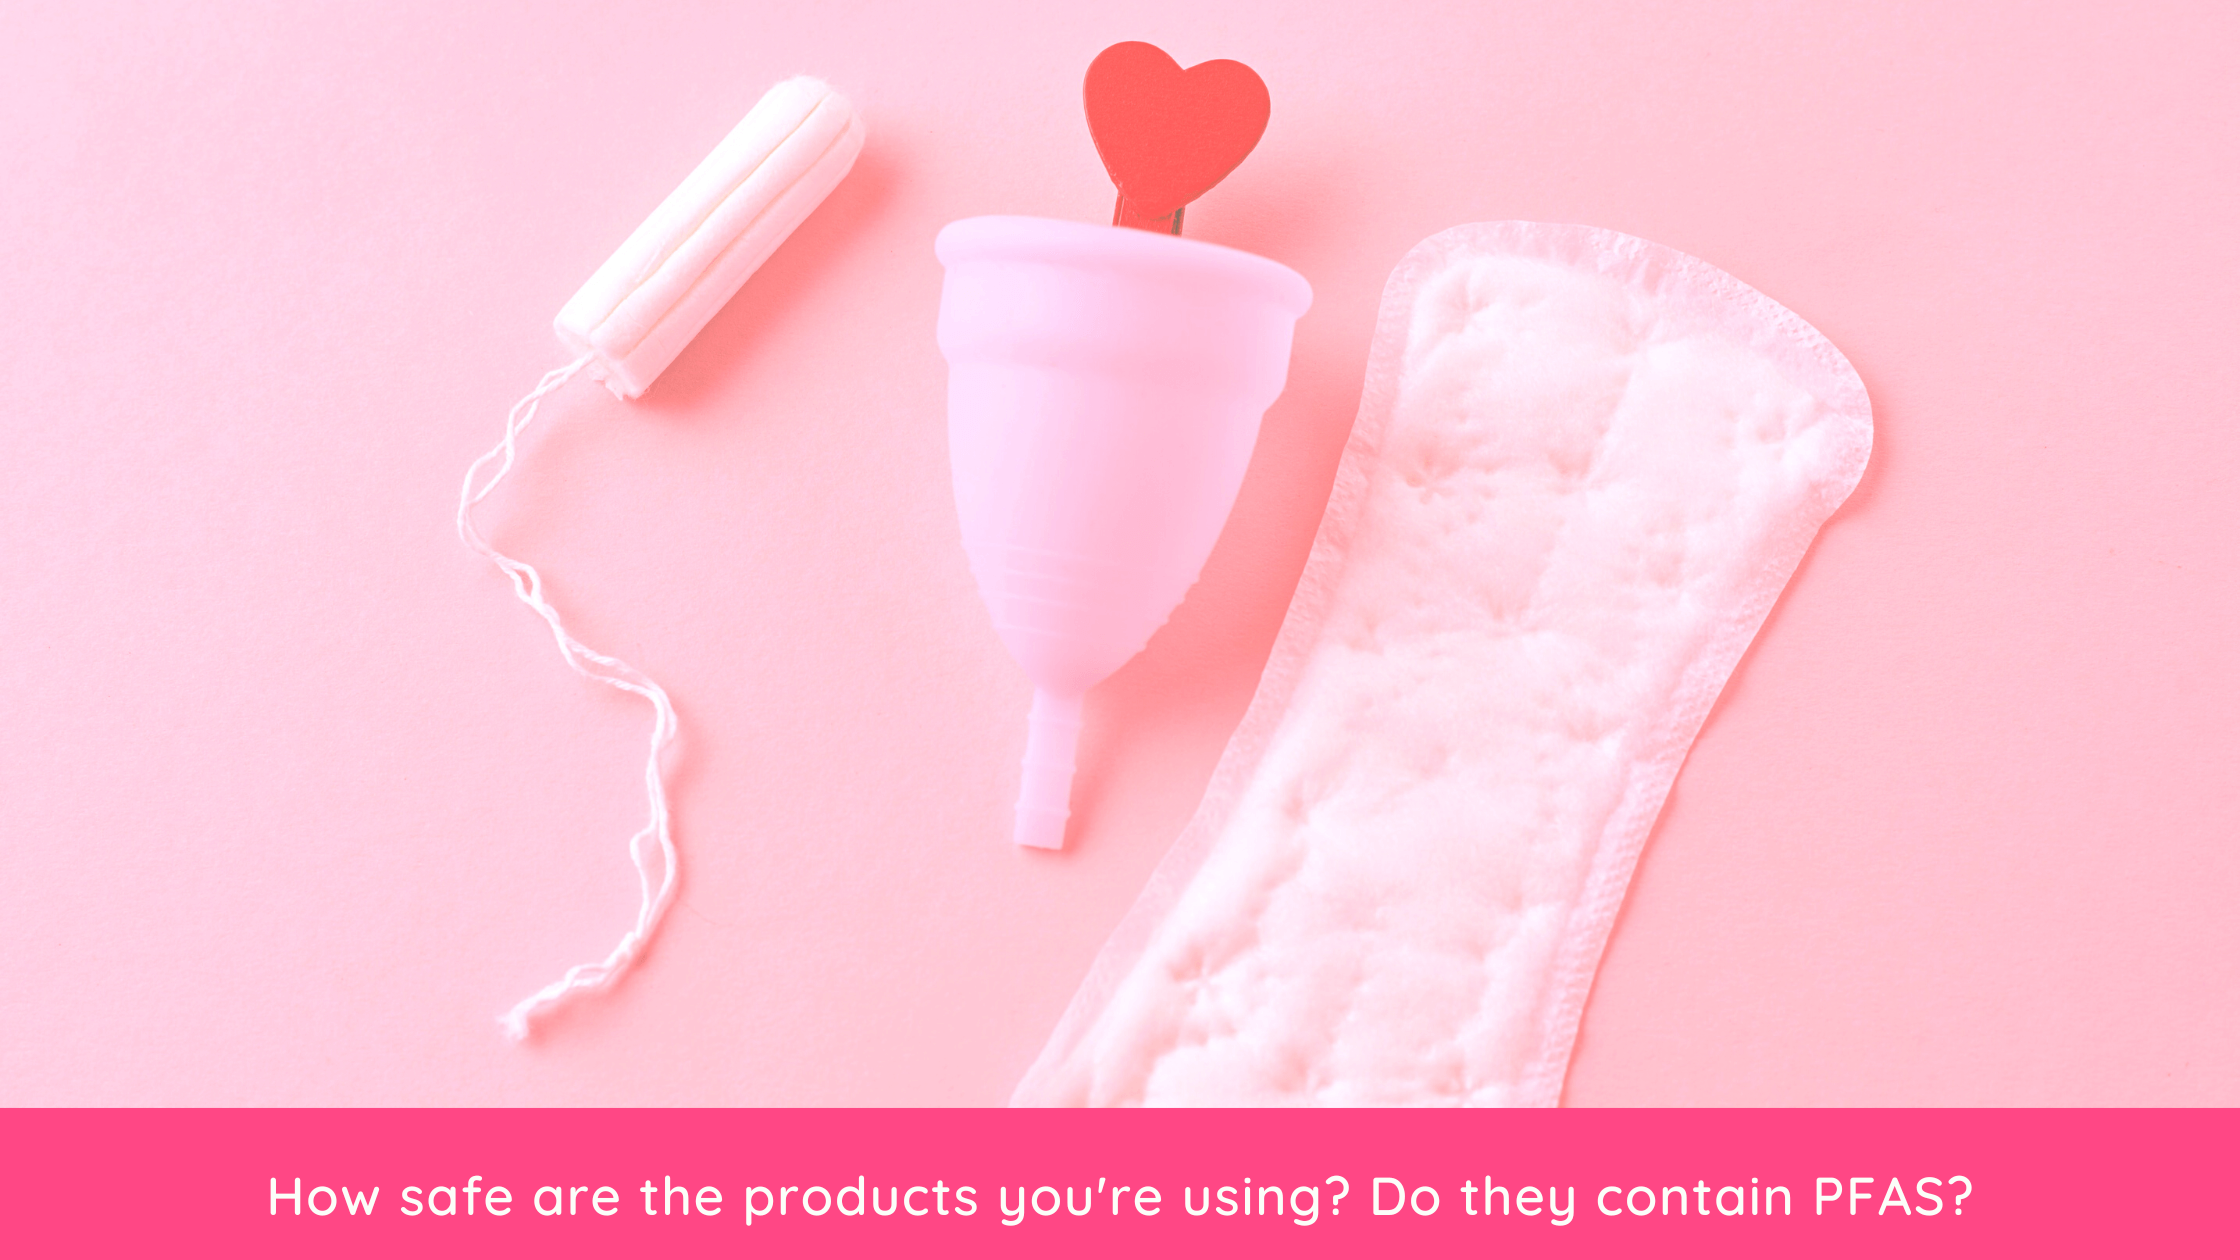 Let's talk about period toxicity  are our knickers safe?? - Knicked  Australia